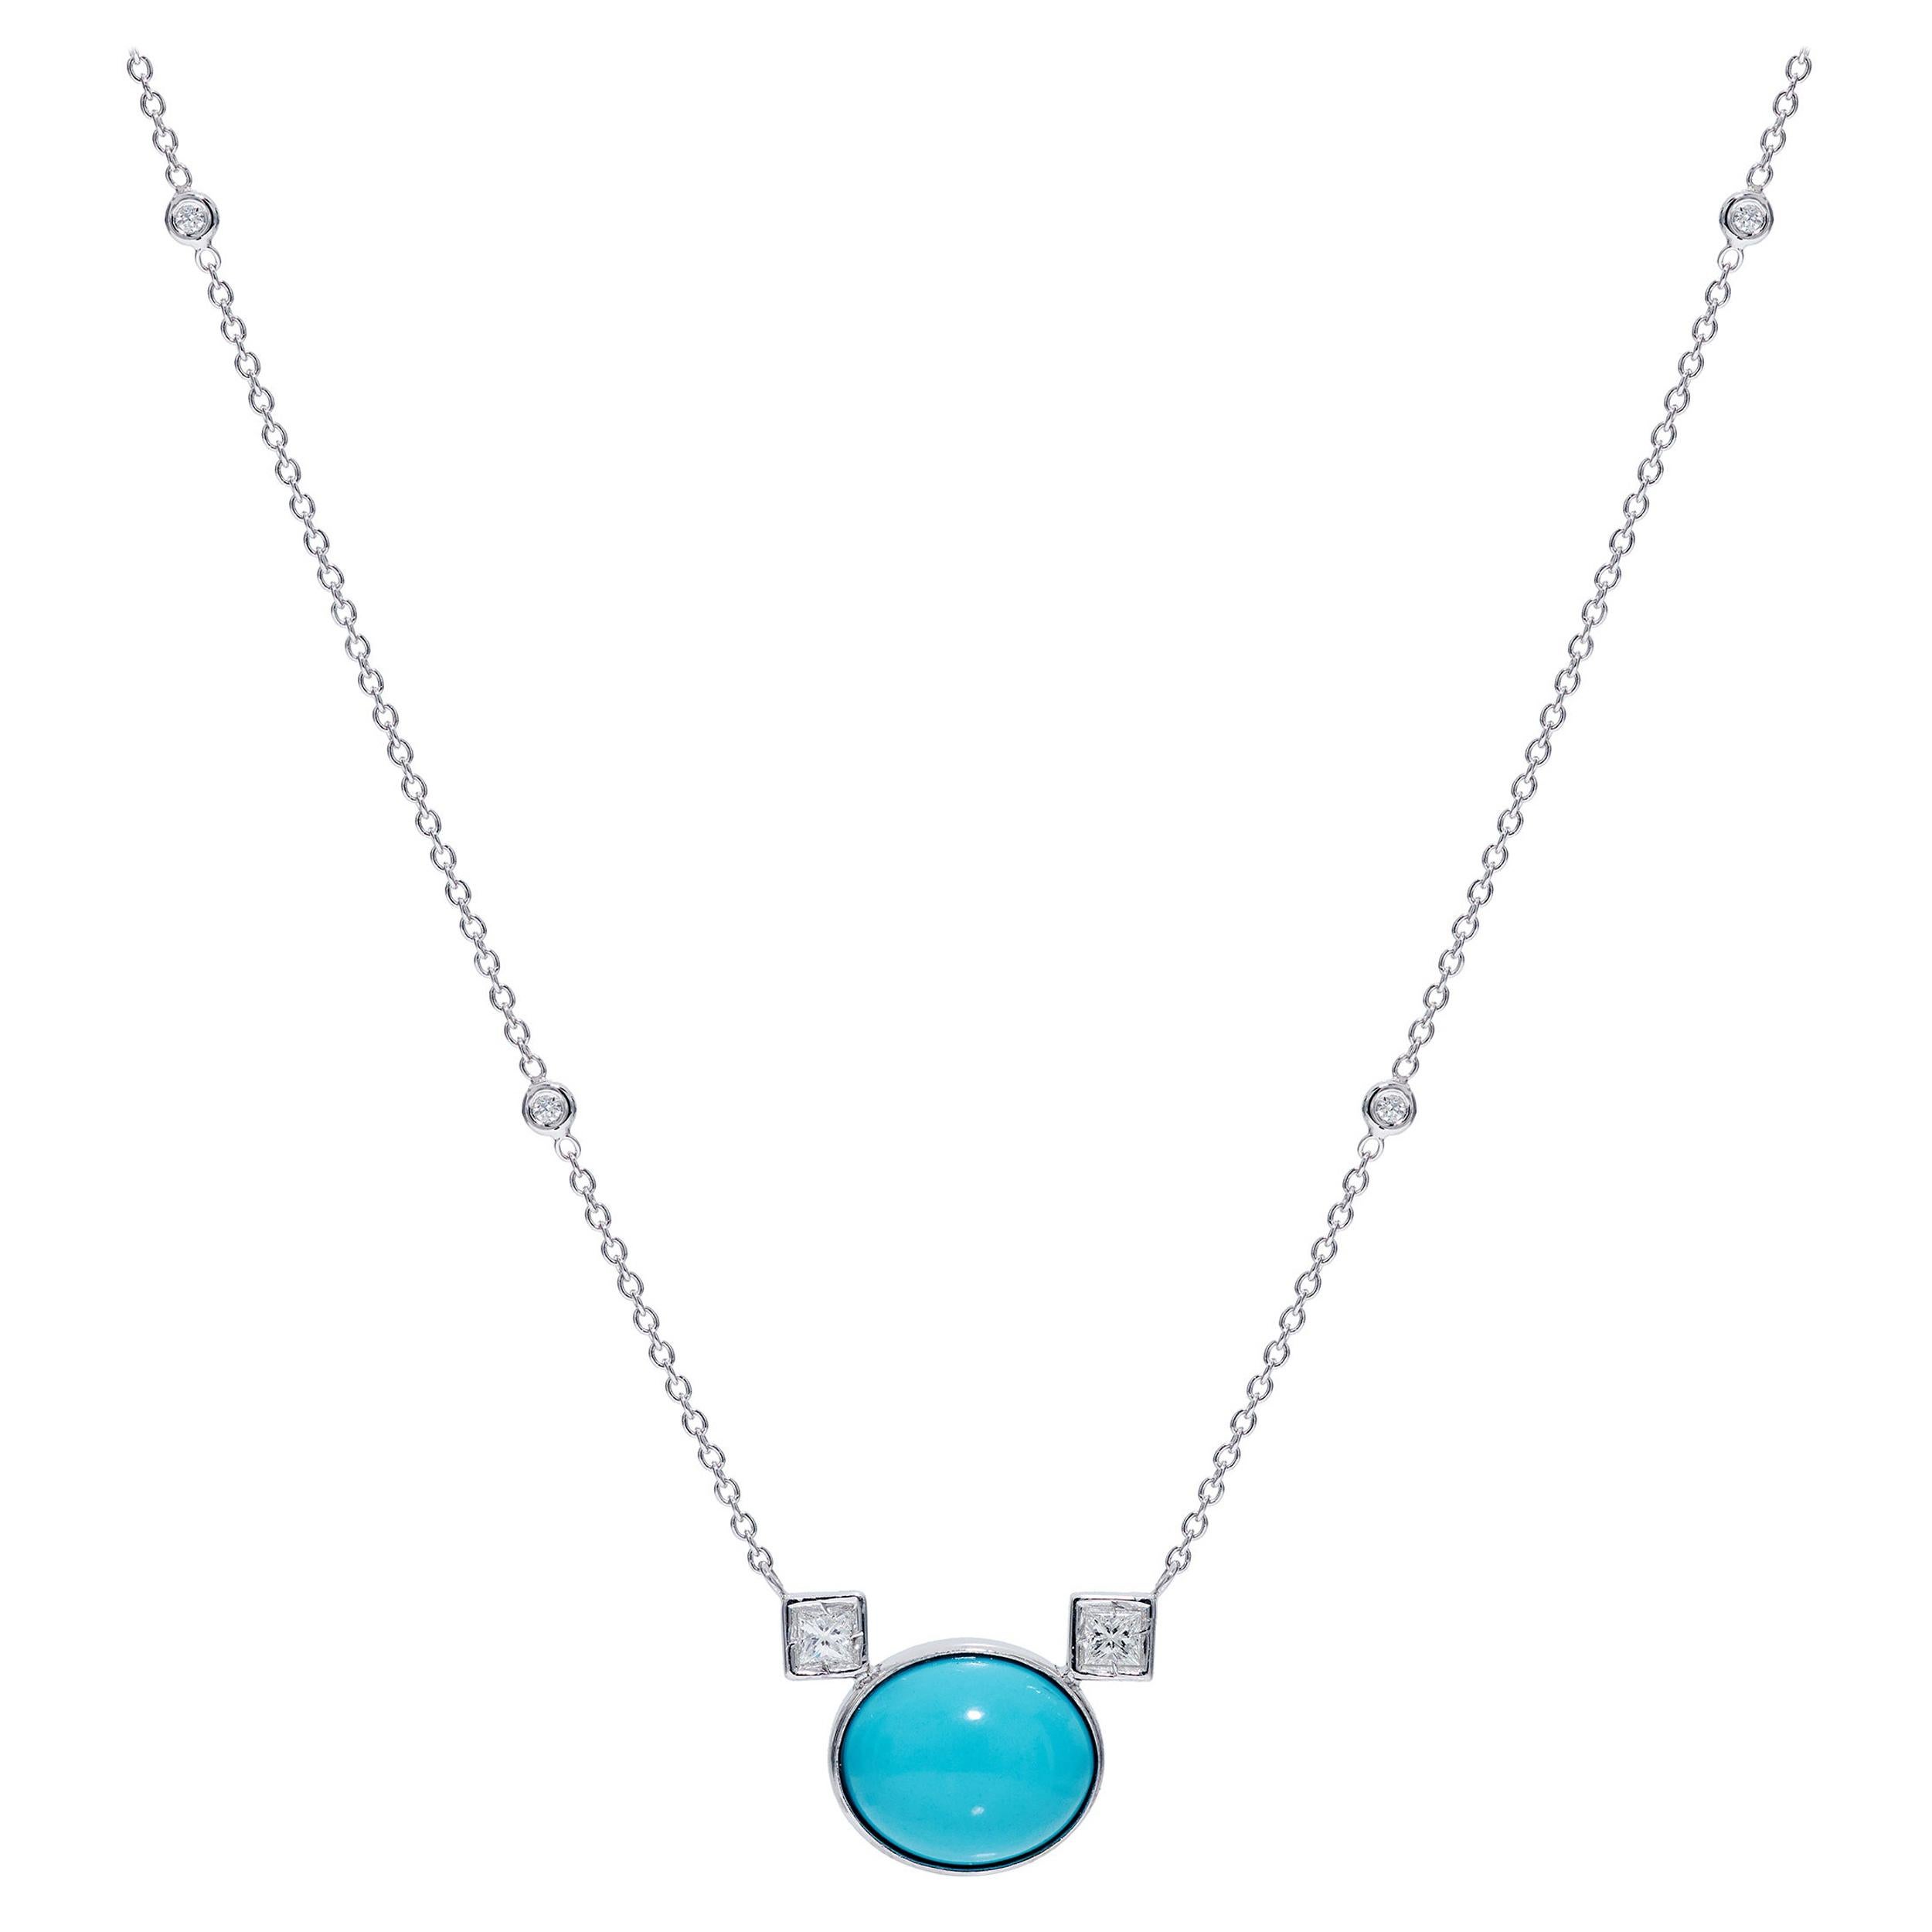 2.74 Carats Oval Cabochon Turquoise and Diamond Necklace in 18 Karat White Gold 